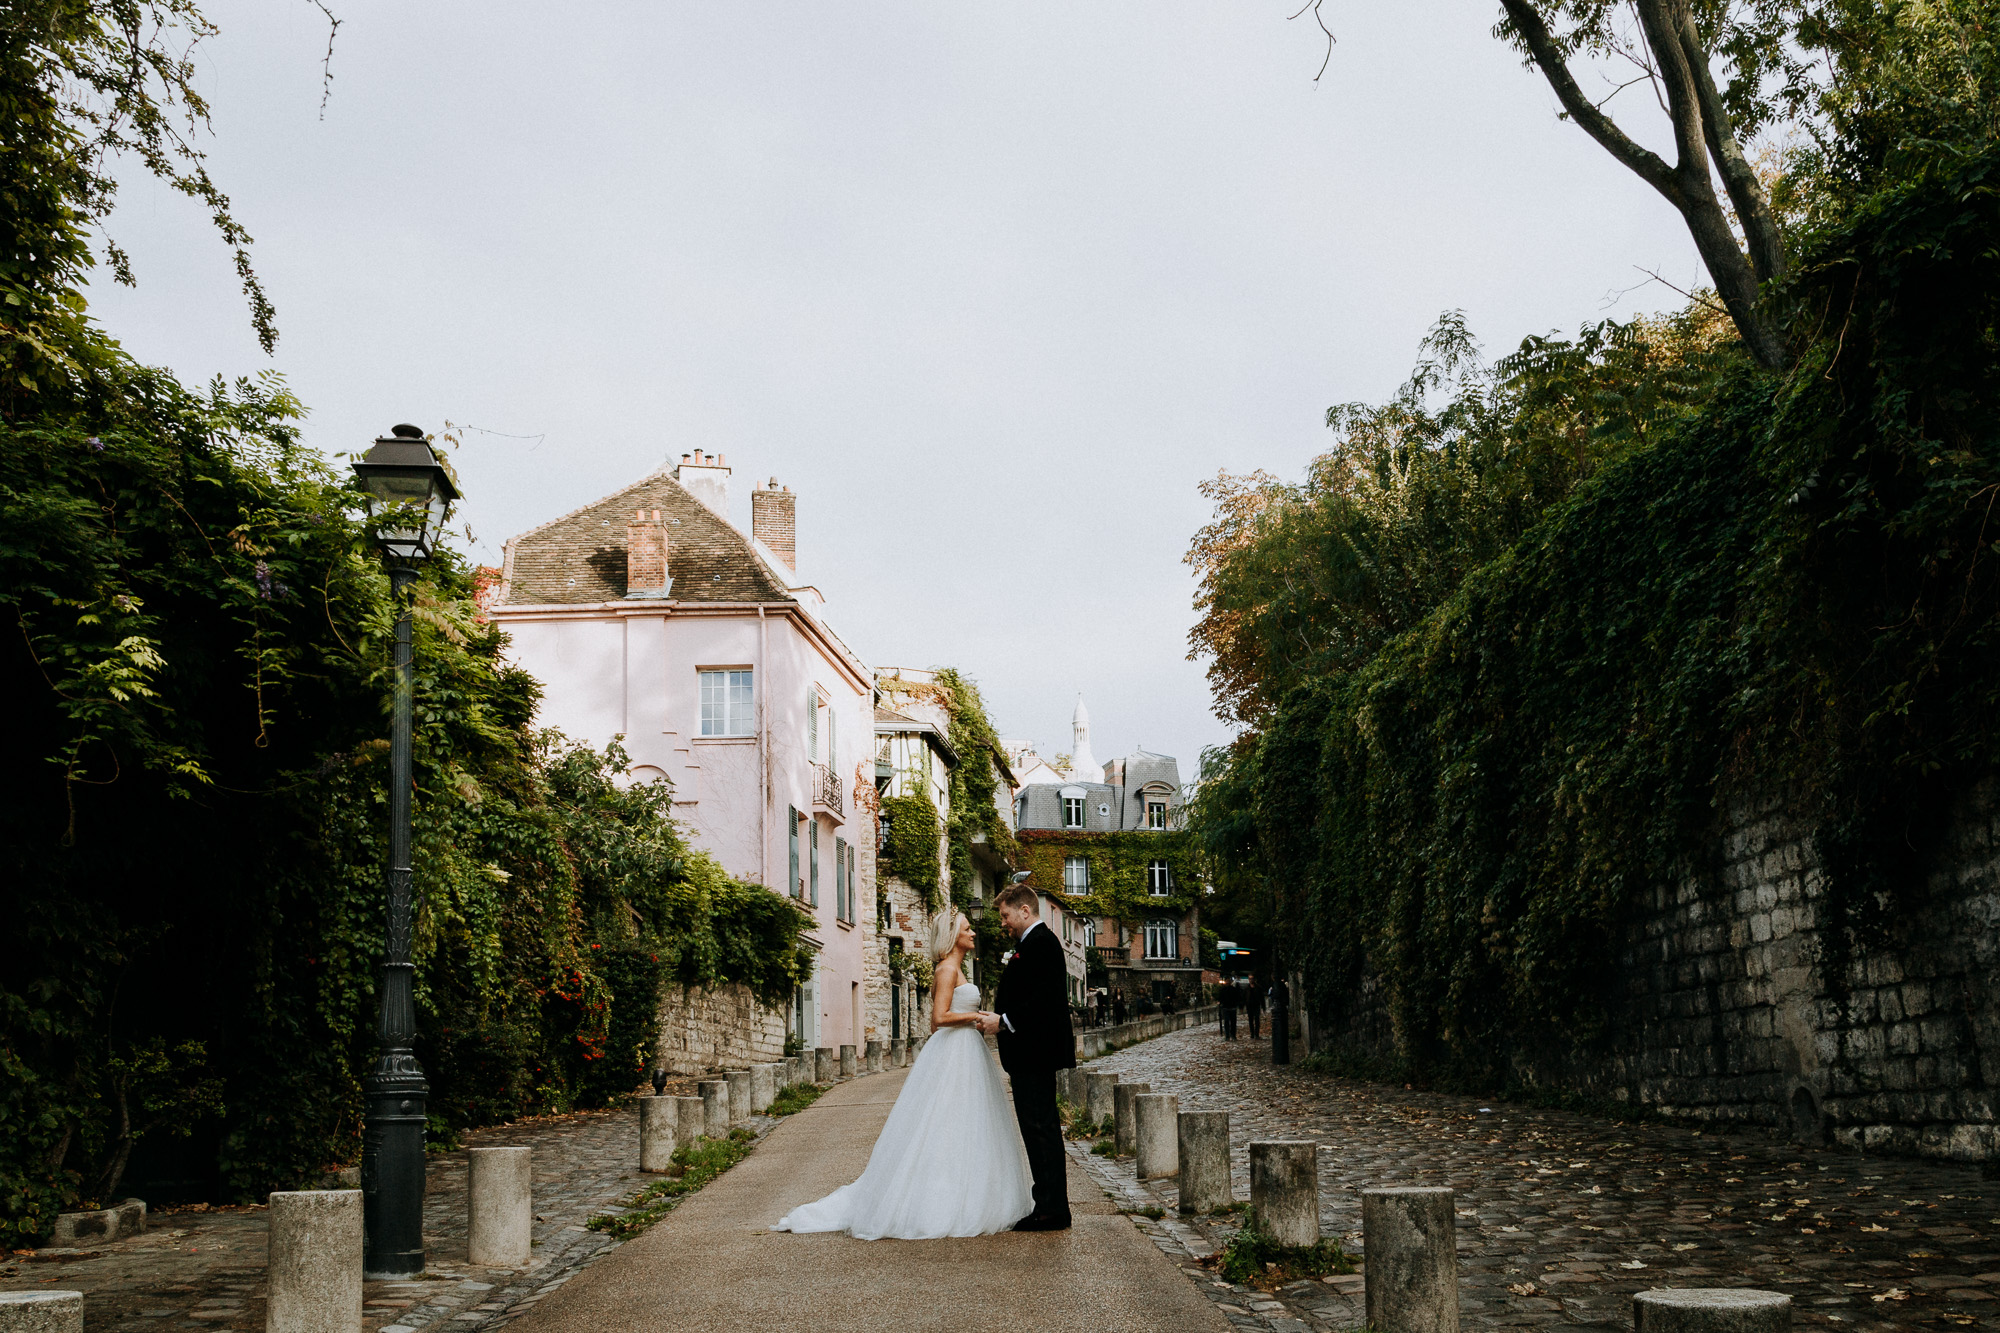 Paris wedding photographer: Montmartre couple photo session time for the bride and groom